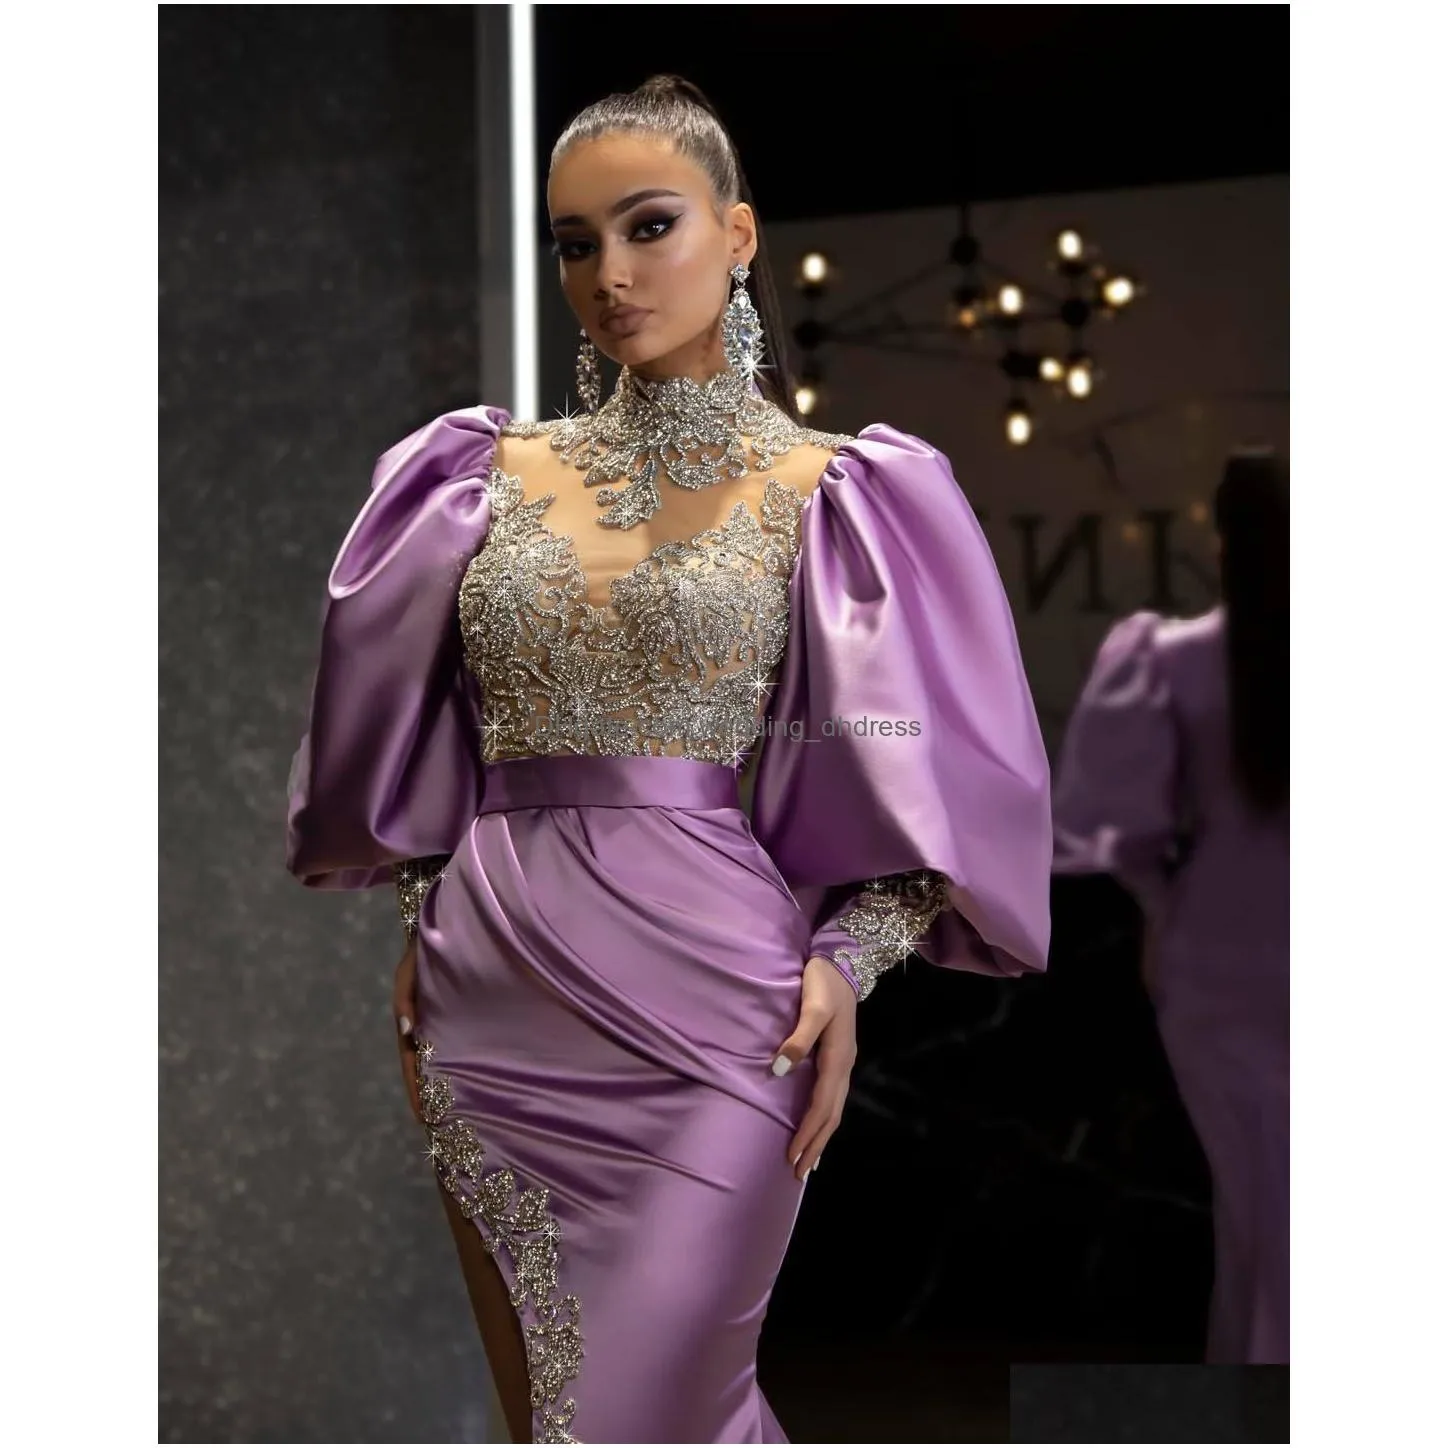 modern puff long sleeves mermaid evening dresses side high split sexy formal occasion gowns high neck lace appliques beaded light purple satin prom dress